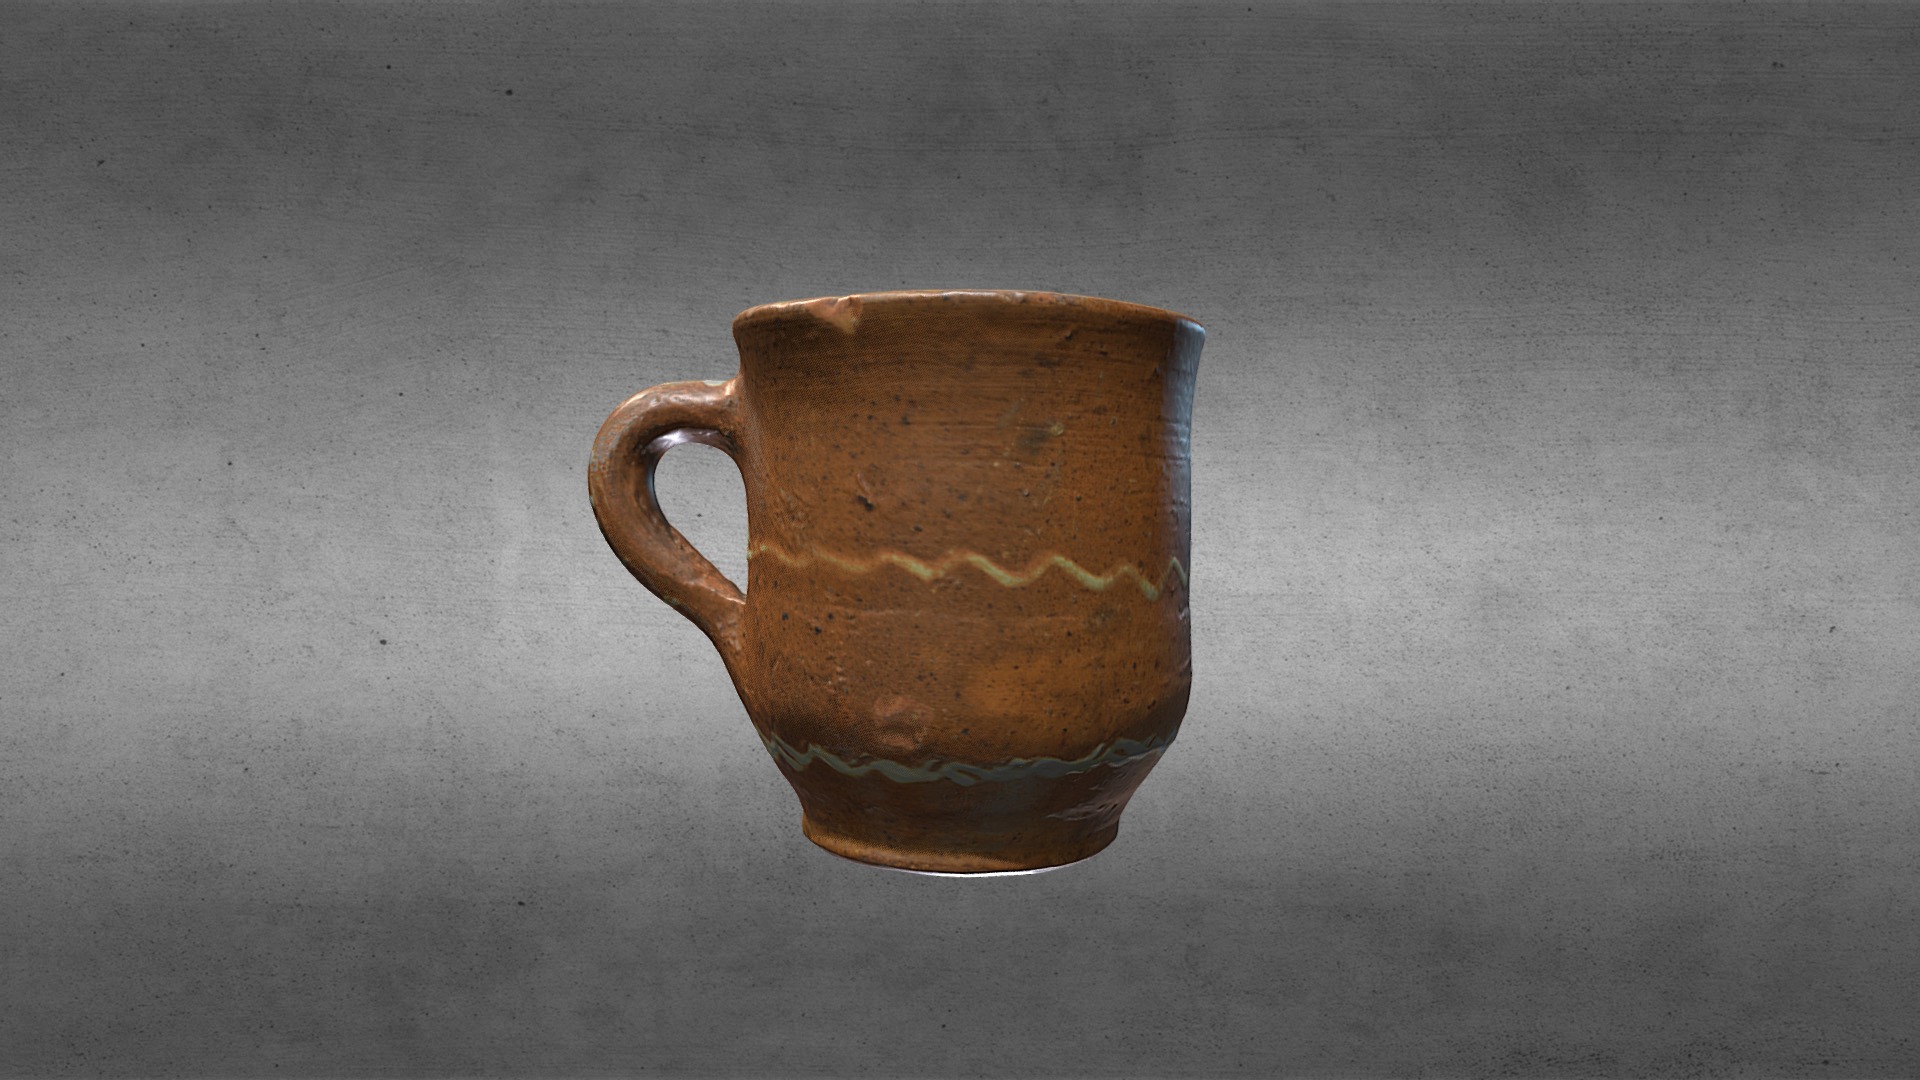 3D model Obarsia ceramic mug - This is a 3D model of the Obarsia ceramic mug. The 3D model is about a cup on a table.